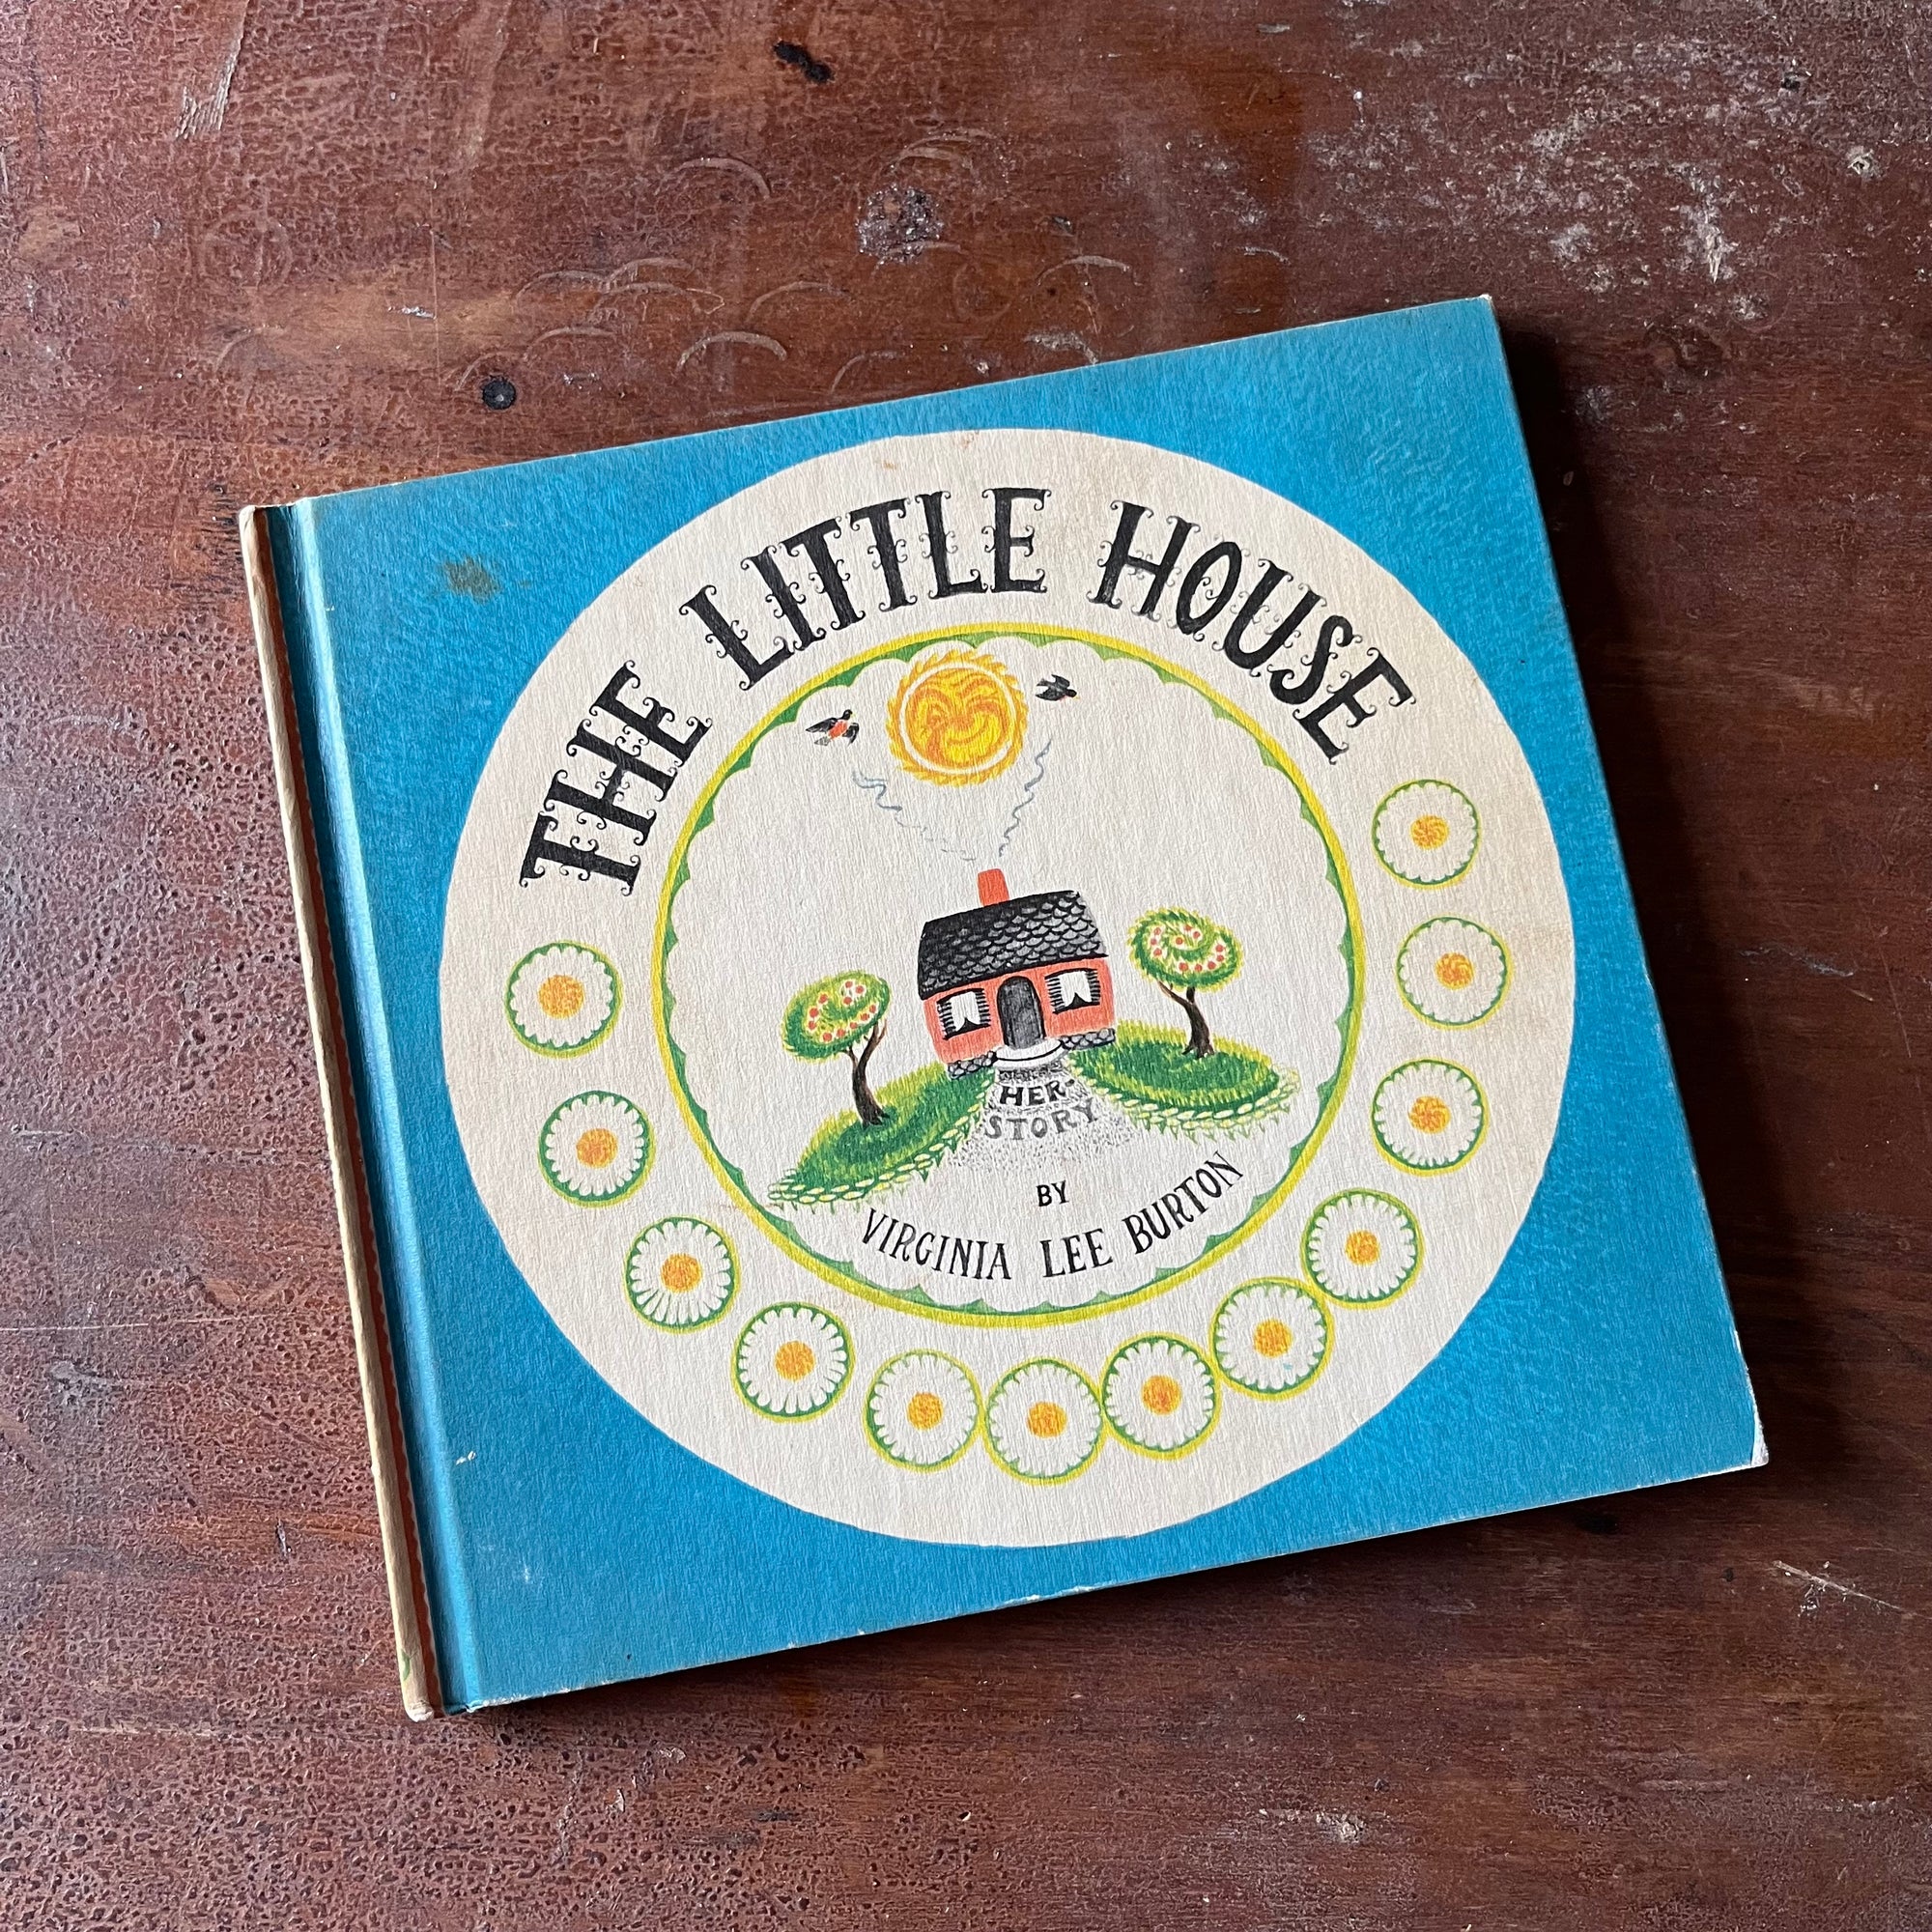 vintage children's picture book, Caldecott Award Winning Book - The Little House Written & Illustrated by Virginia Lee Burton - view of the front cover with an illustration of the little house beneath a smiling sun